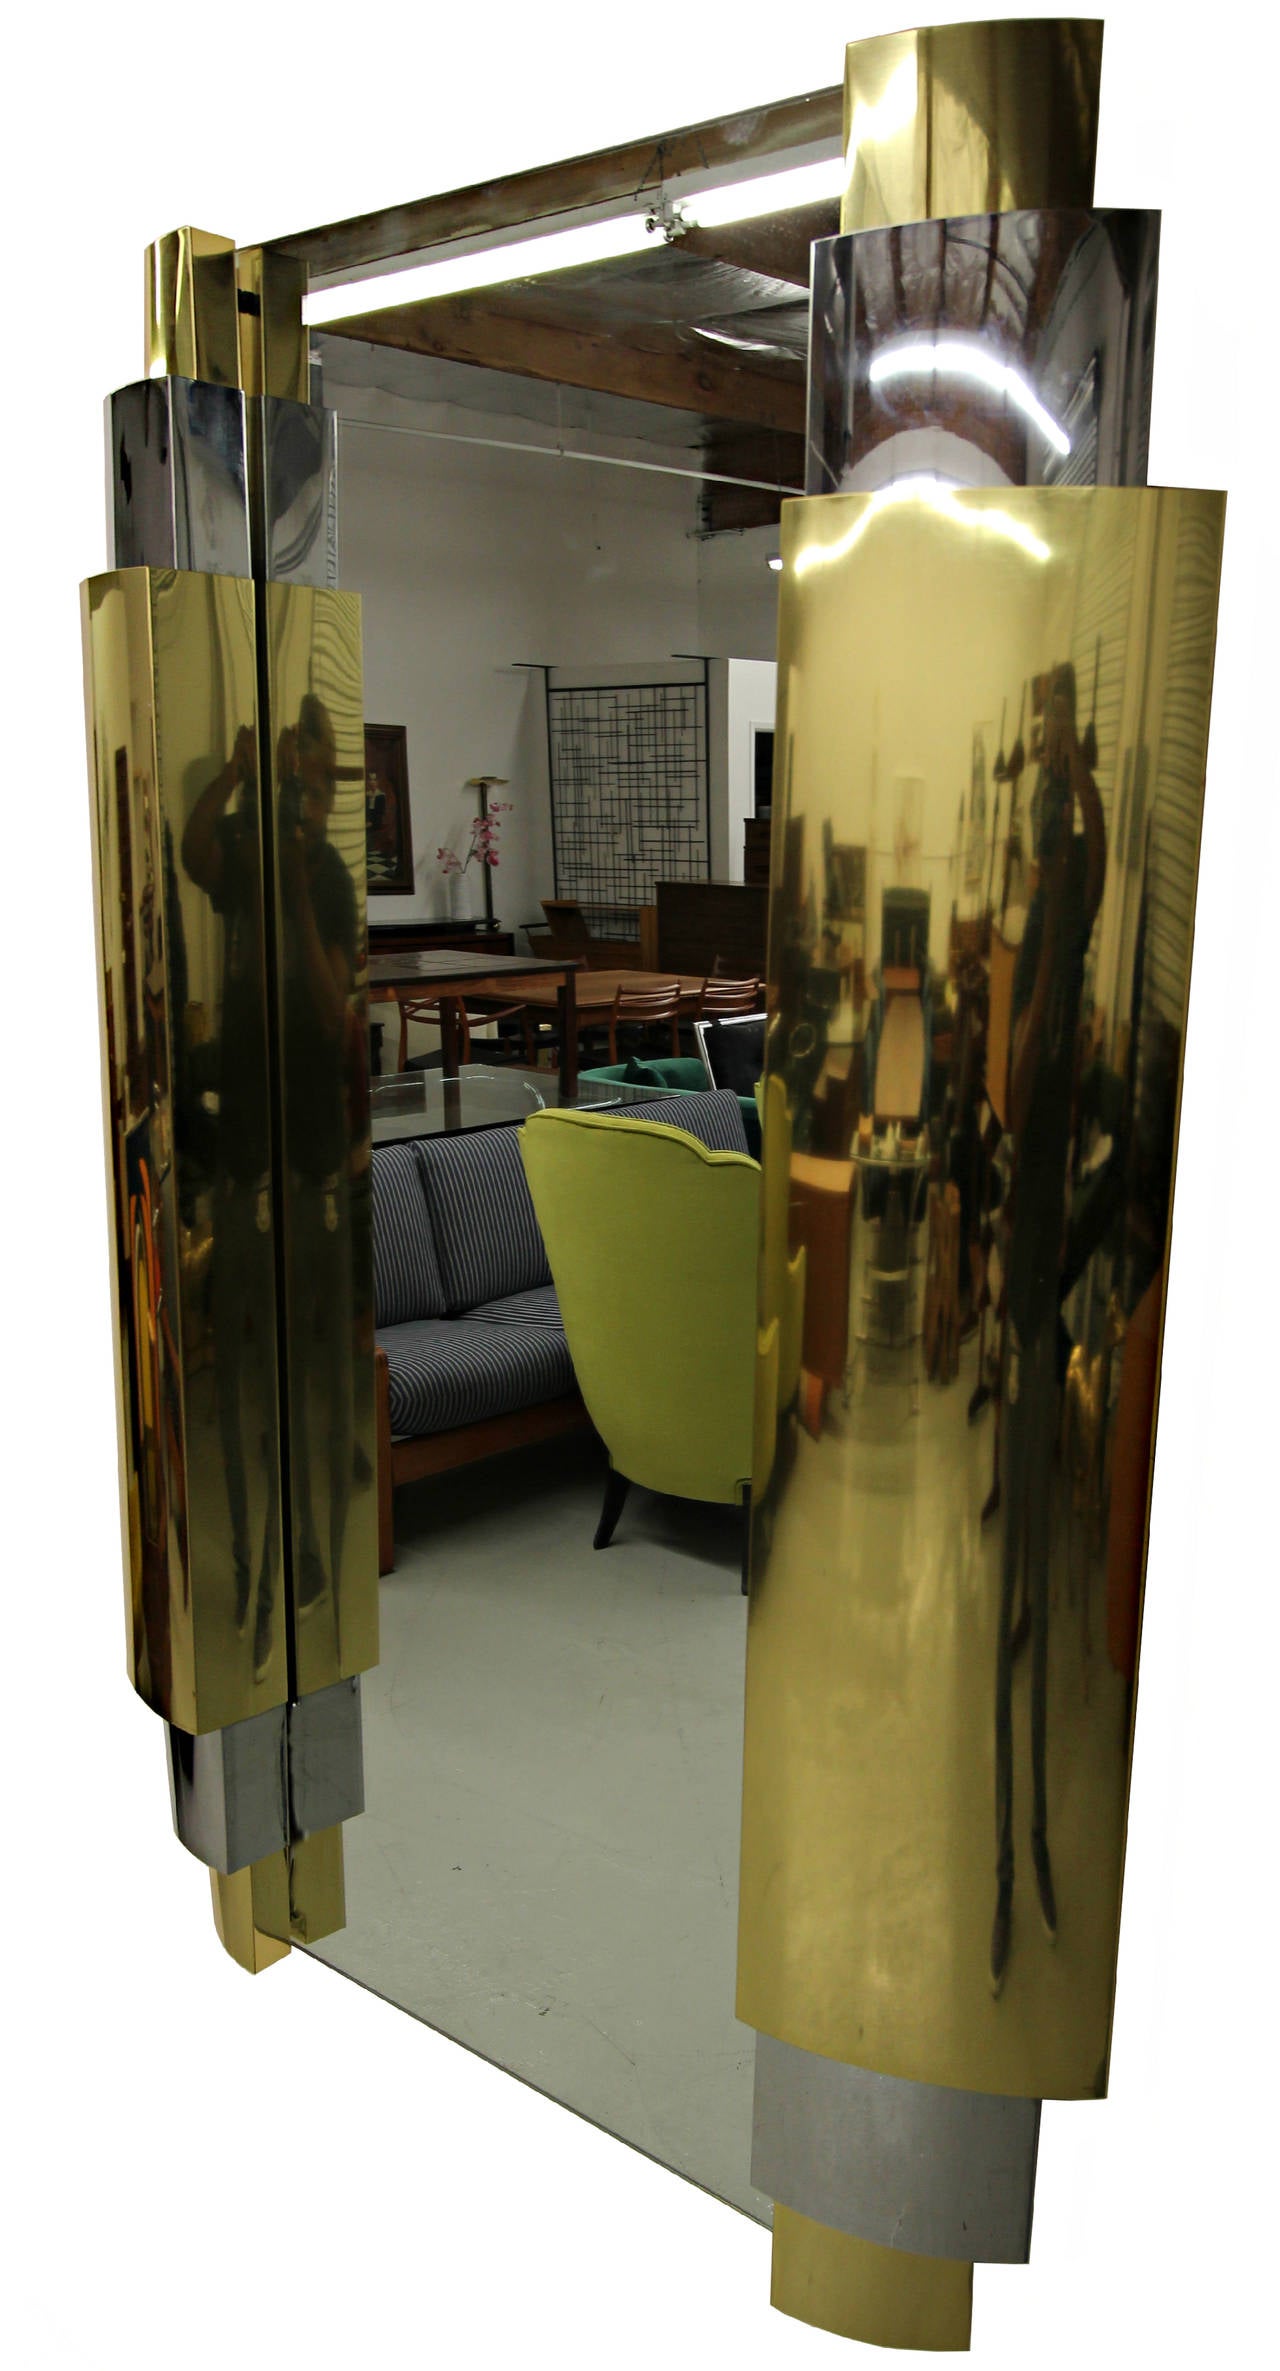 Absolutely stunning and very large Art Deco style tiered chrome and brass mirror by Curtis Jere. Signed and dated 1985.

Mirror is in overall good condition showing minimal signs of wear from age and use.